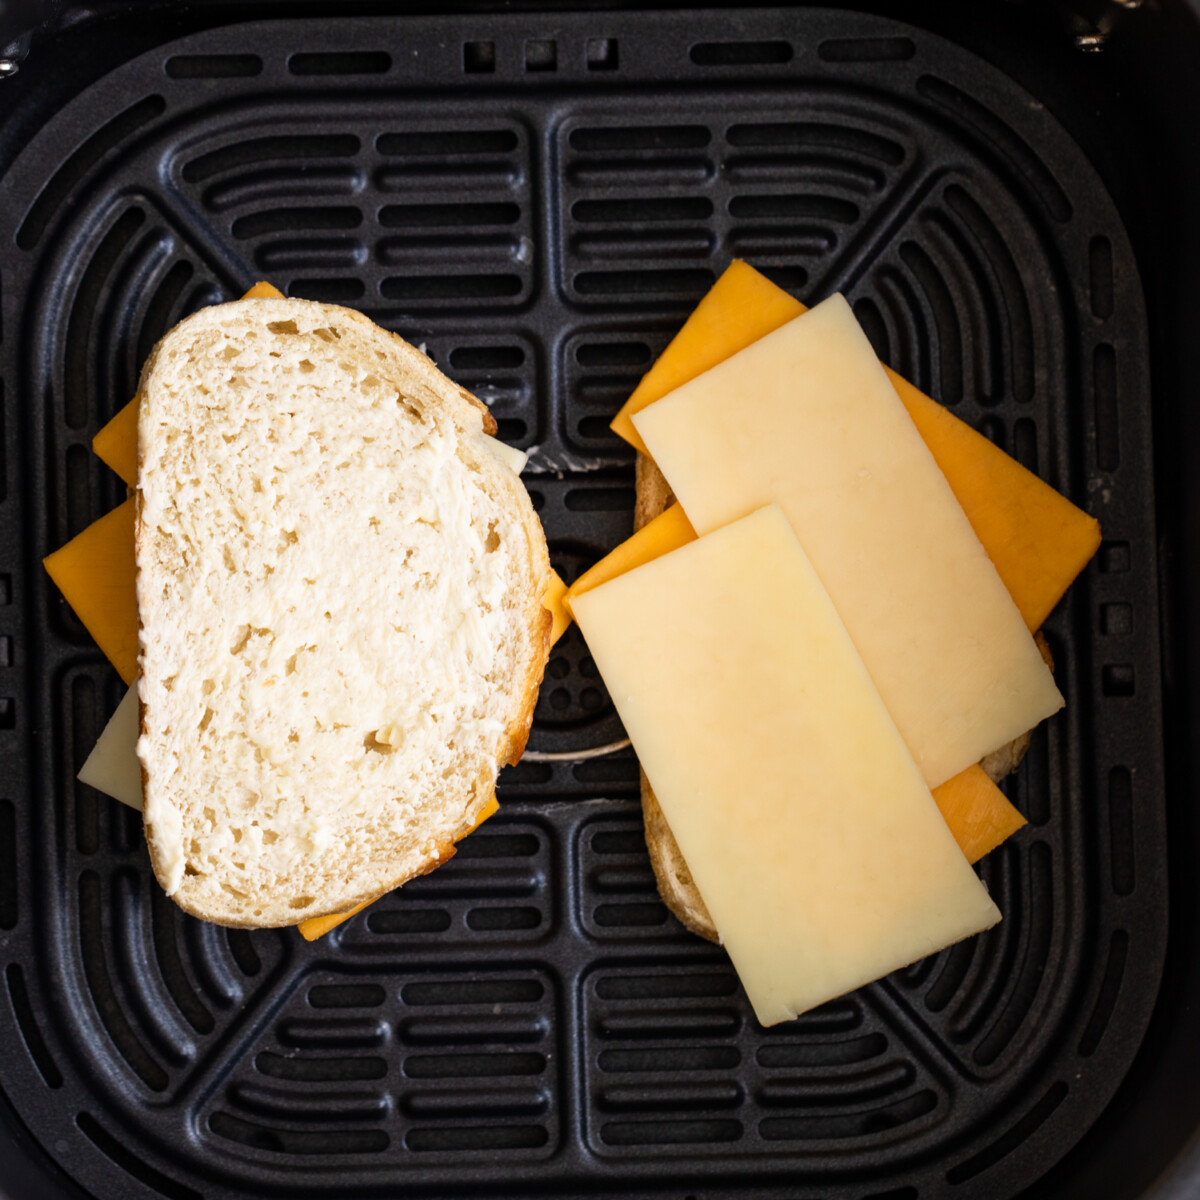 Adding cheese to sandwich bread in an air fryer.